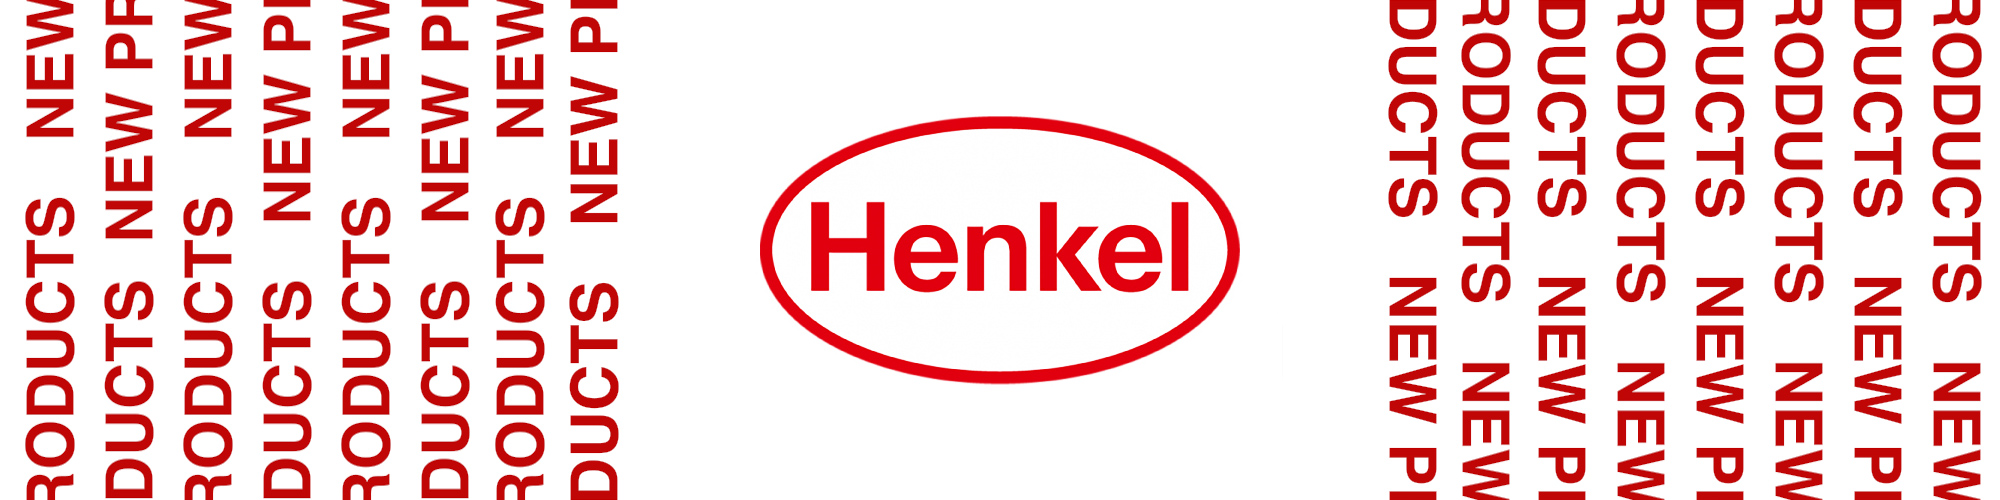 New batch of Henkel products